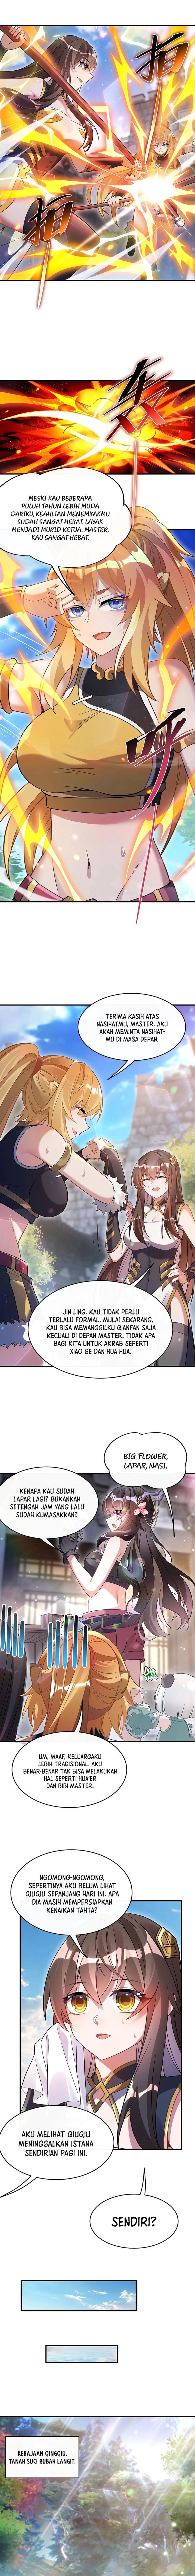 Dilarang COPAS - situs resmi www.mangacanblog.com - Komik my female apprentices are all big shots from the future 250 - chapter 250 251 Indonesia my female apprentices are all big shots from the future 250 - chapter 250 Terbaru 5|Baca Manga Komik Indonesia|Mangacan